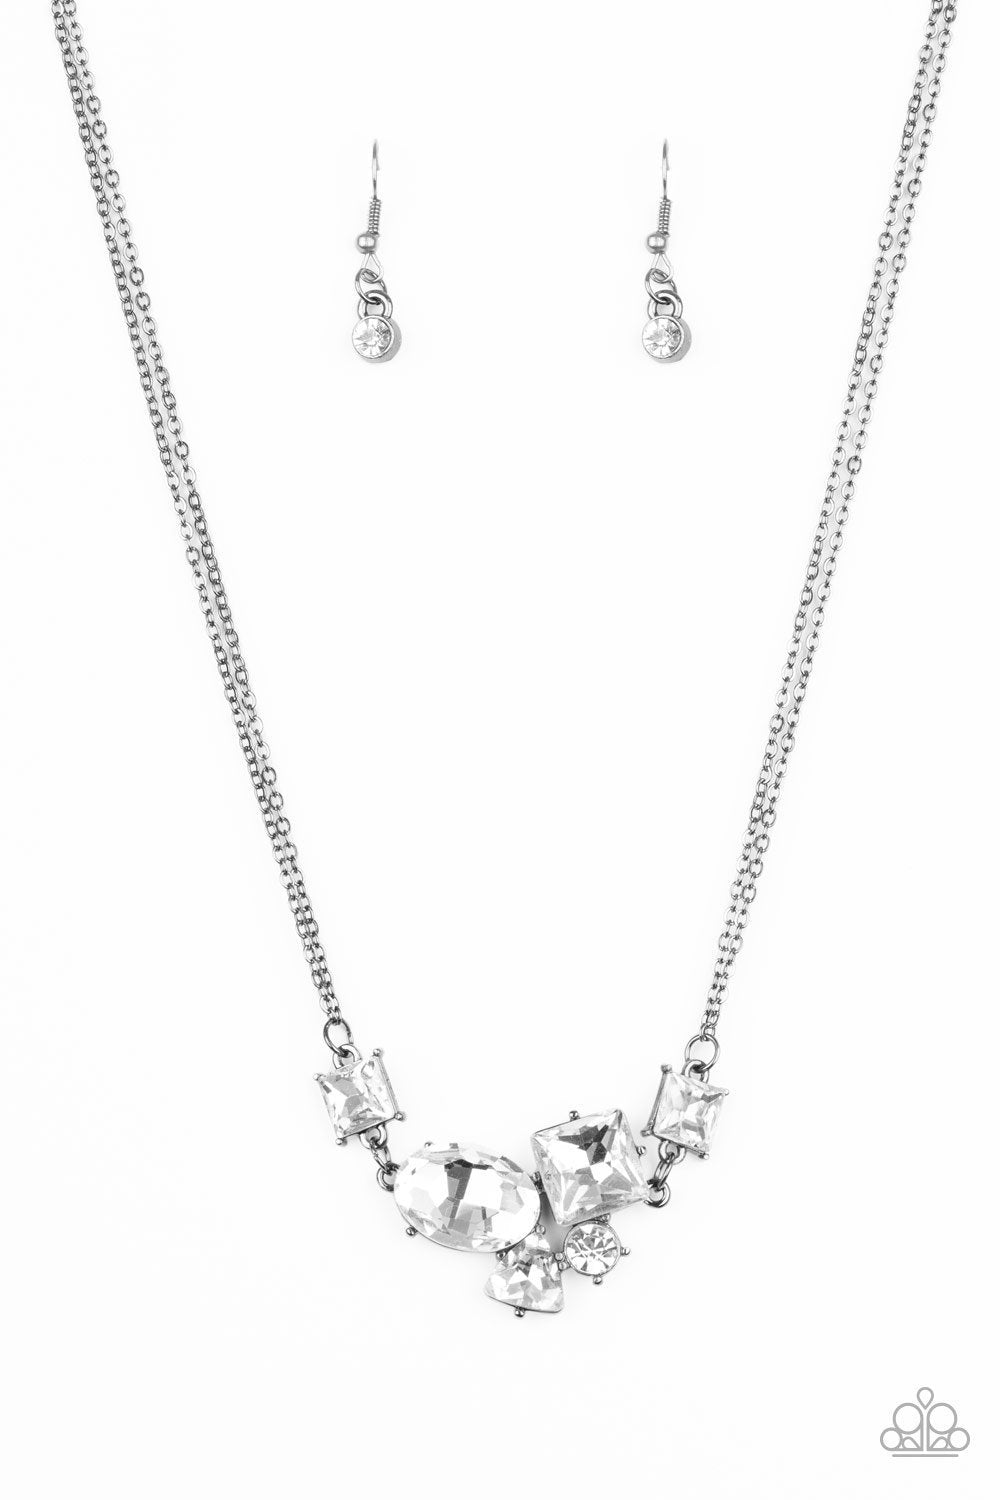 Constellation Collection Gunmetal Black and White Rhinestone Necklace - Paparazzi Accessories-CarasShop.com - $5 Jewelry by Cara Jewels